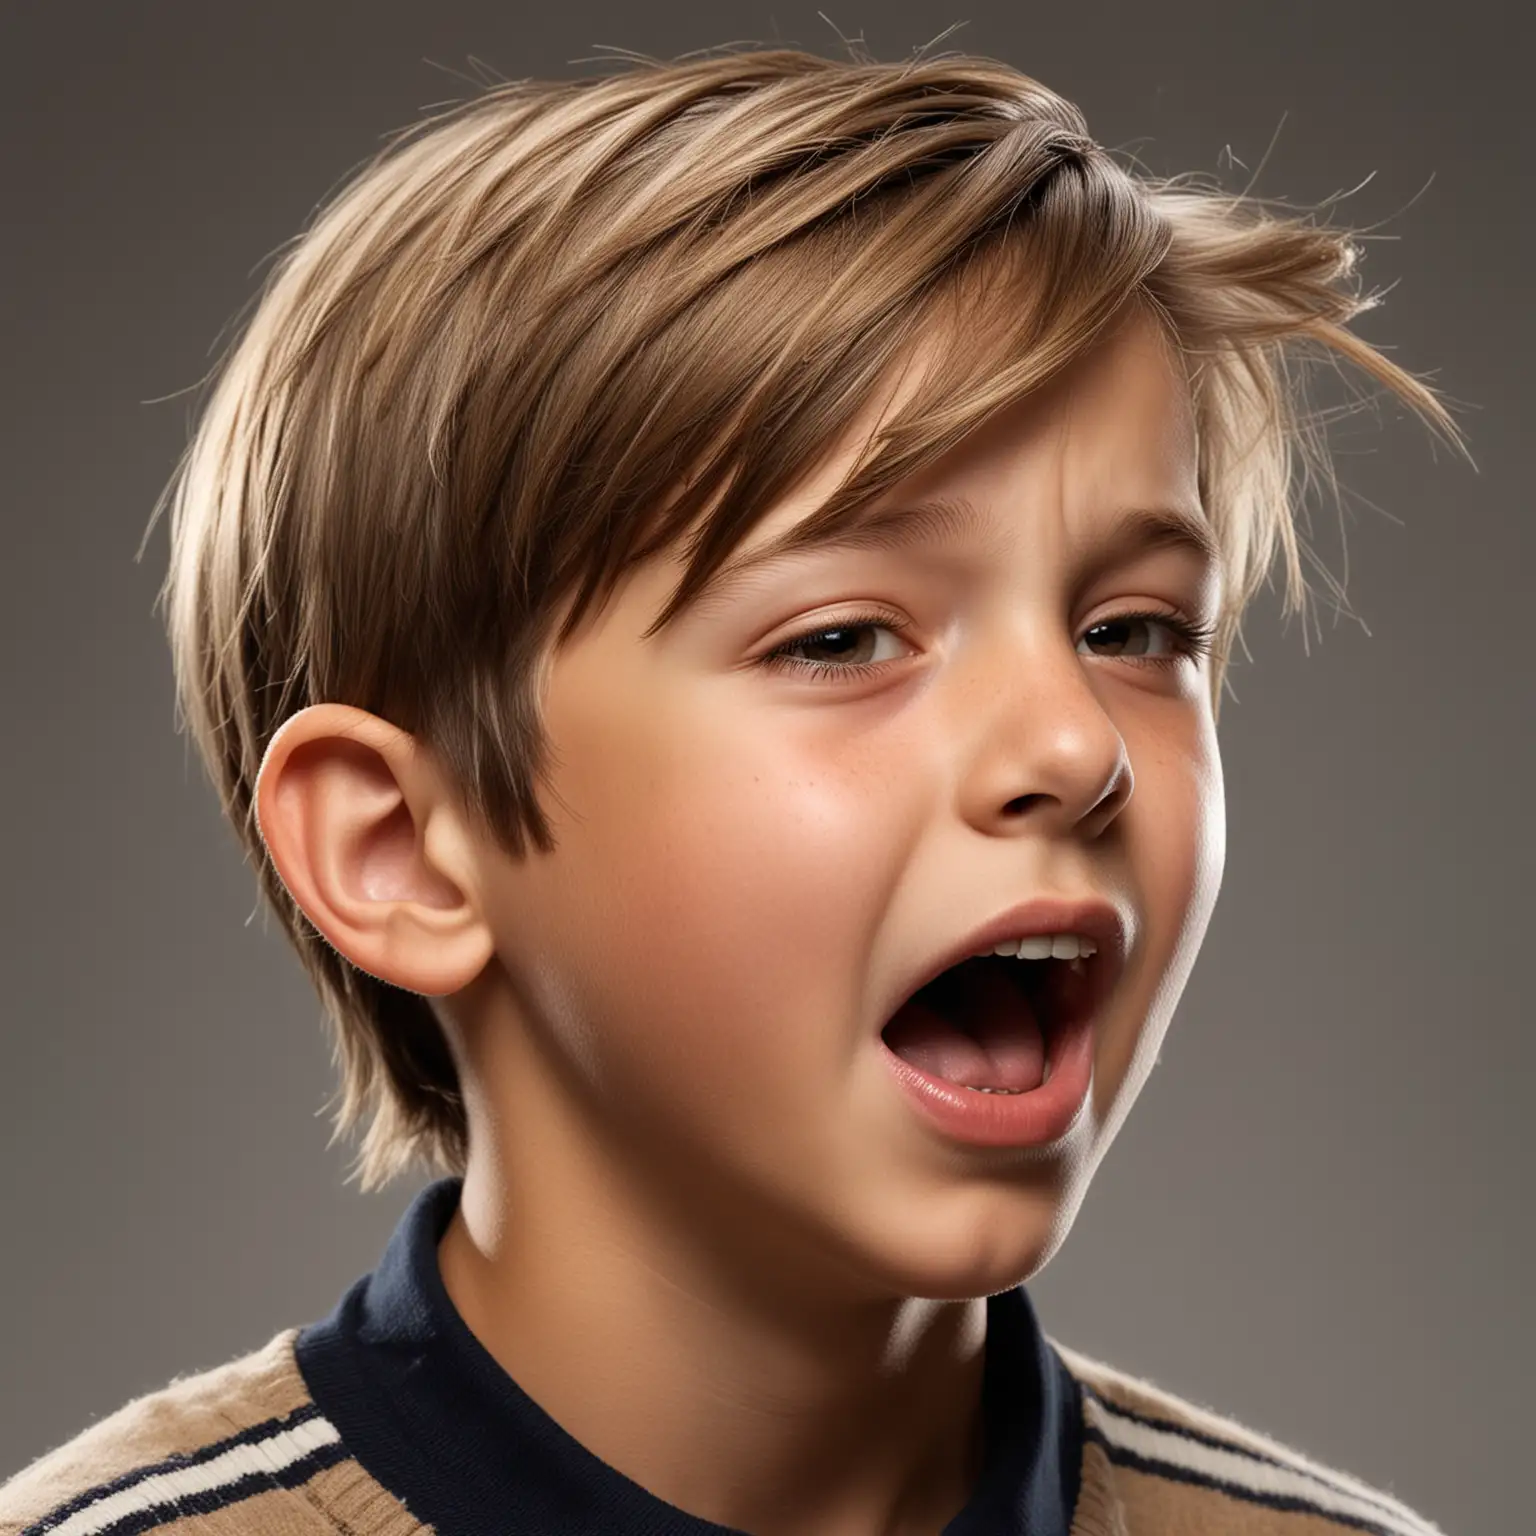 Young Boy with Neatly Combed Light Brown Hair Yawning